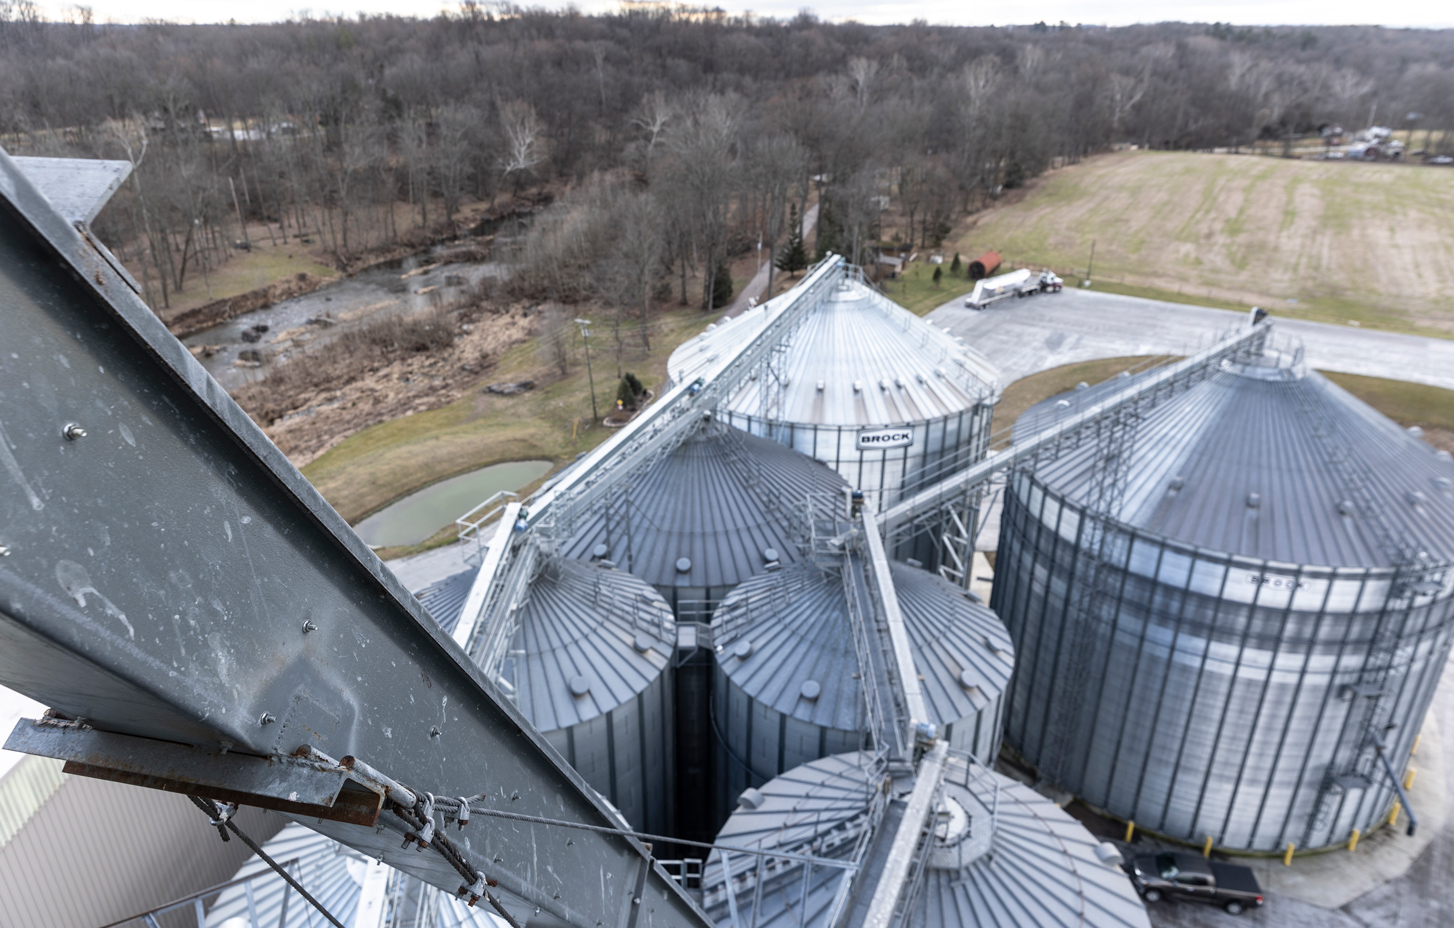 bins-vs-bags-which-is-the-best-grain-storage-option